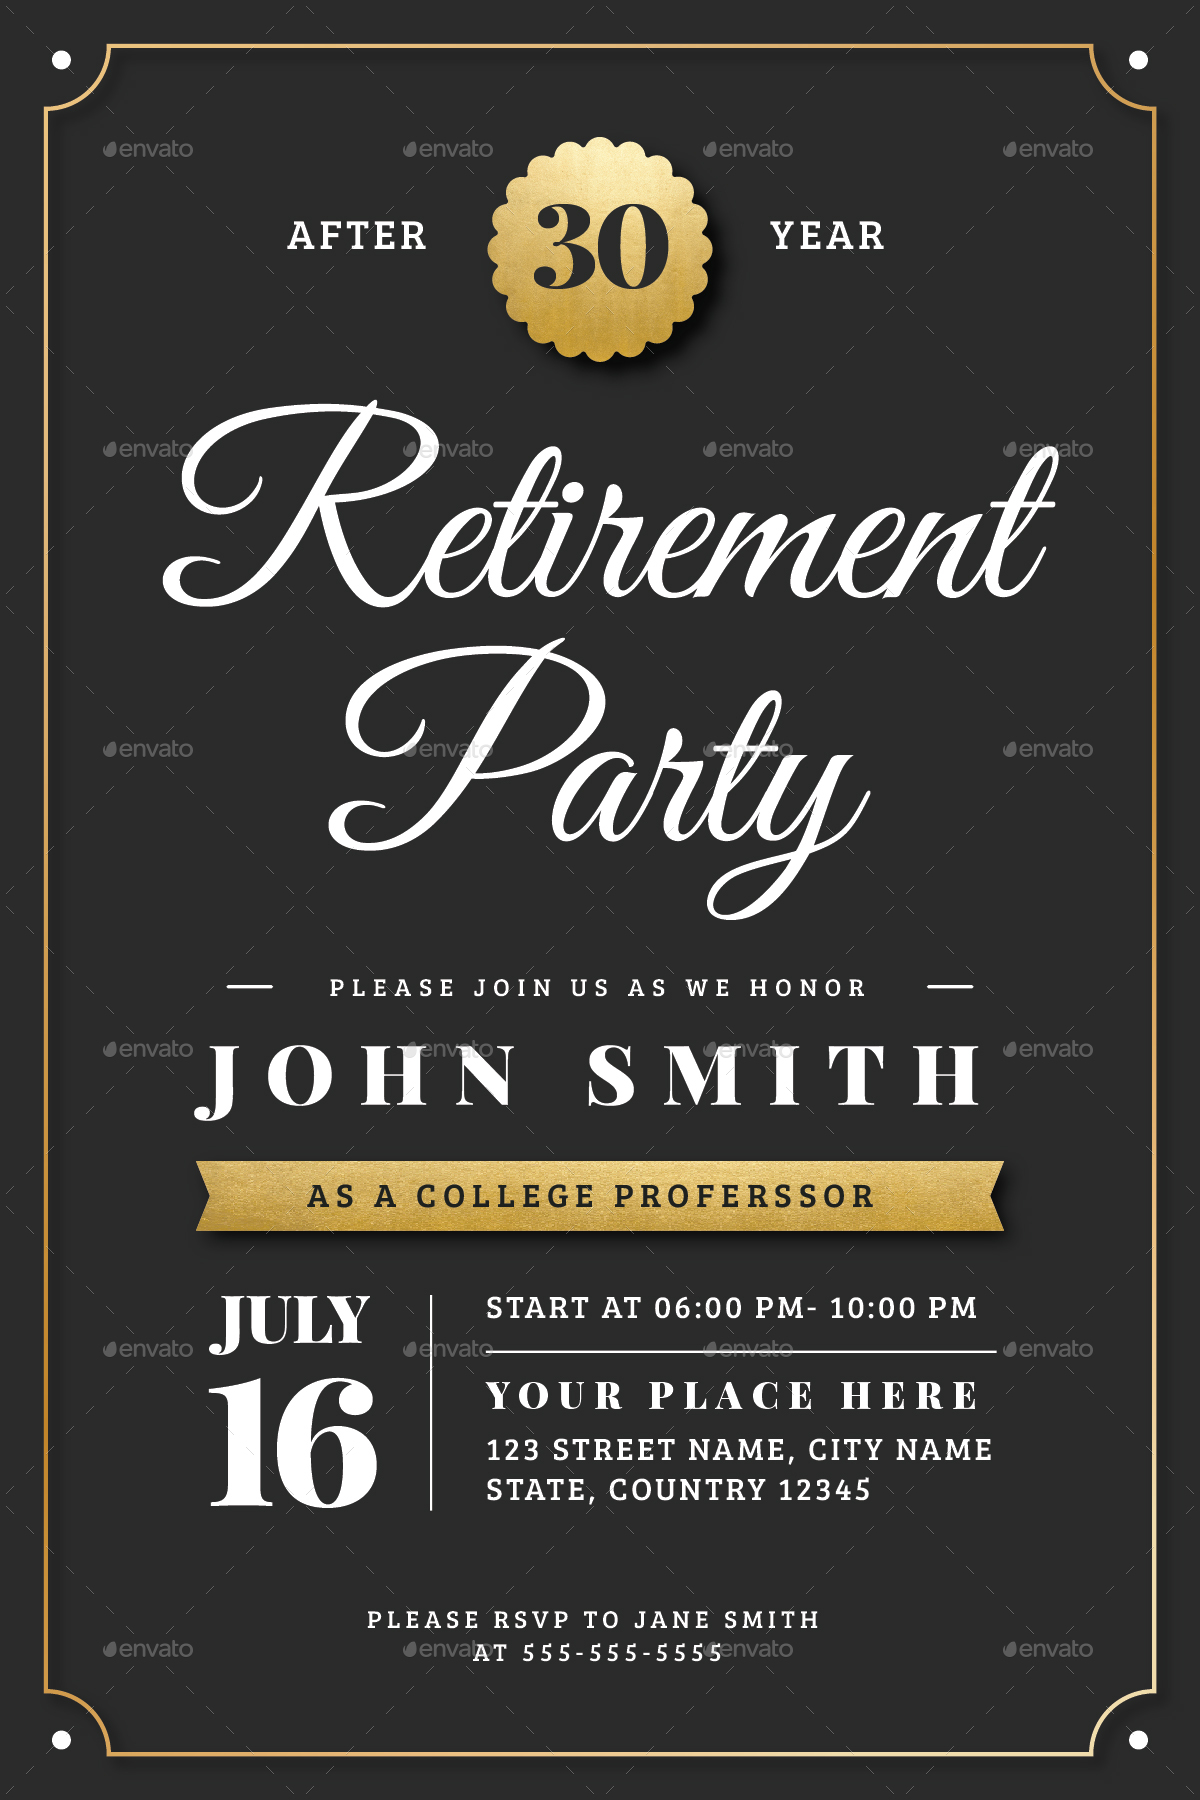 gold-retirement-invitation-flyer-templates-by-vector-vactory-graphicriver